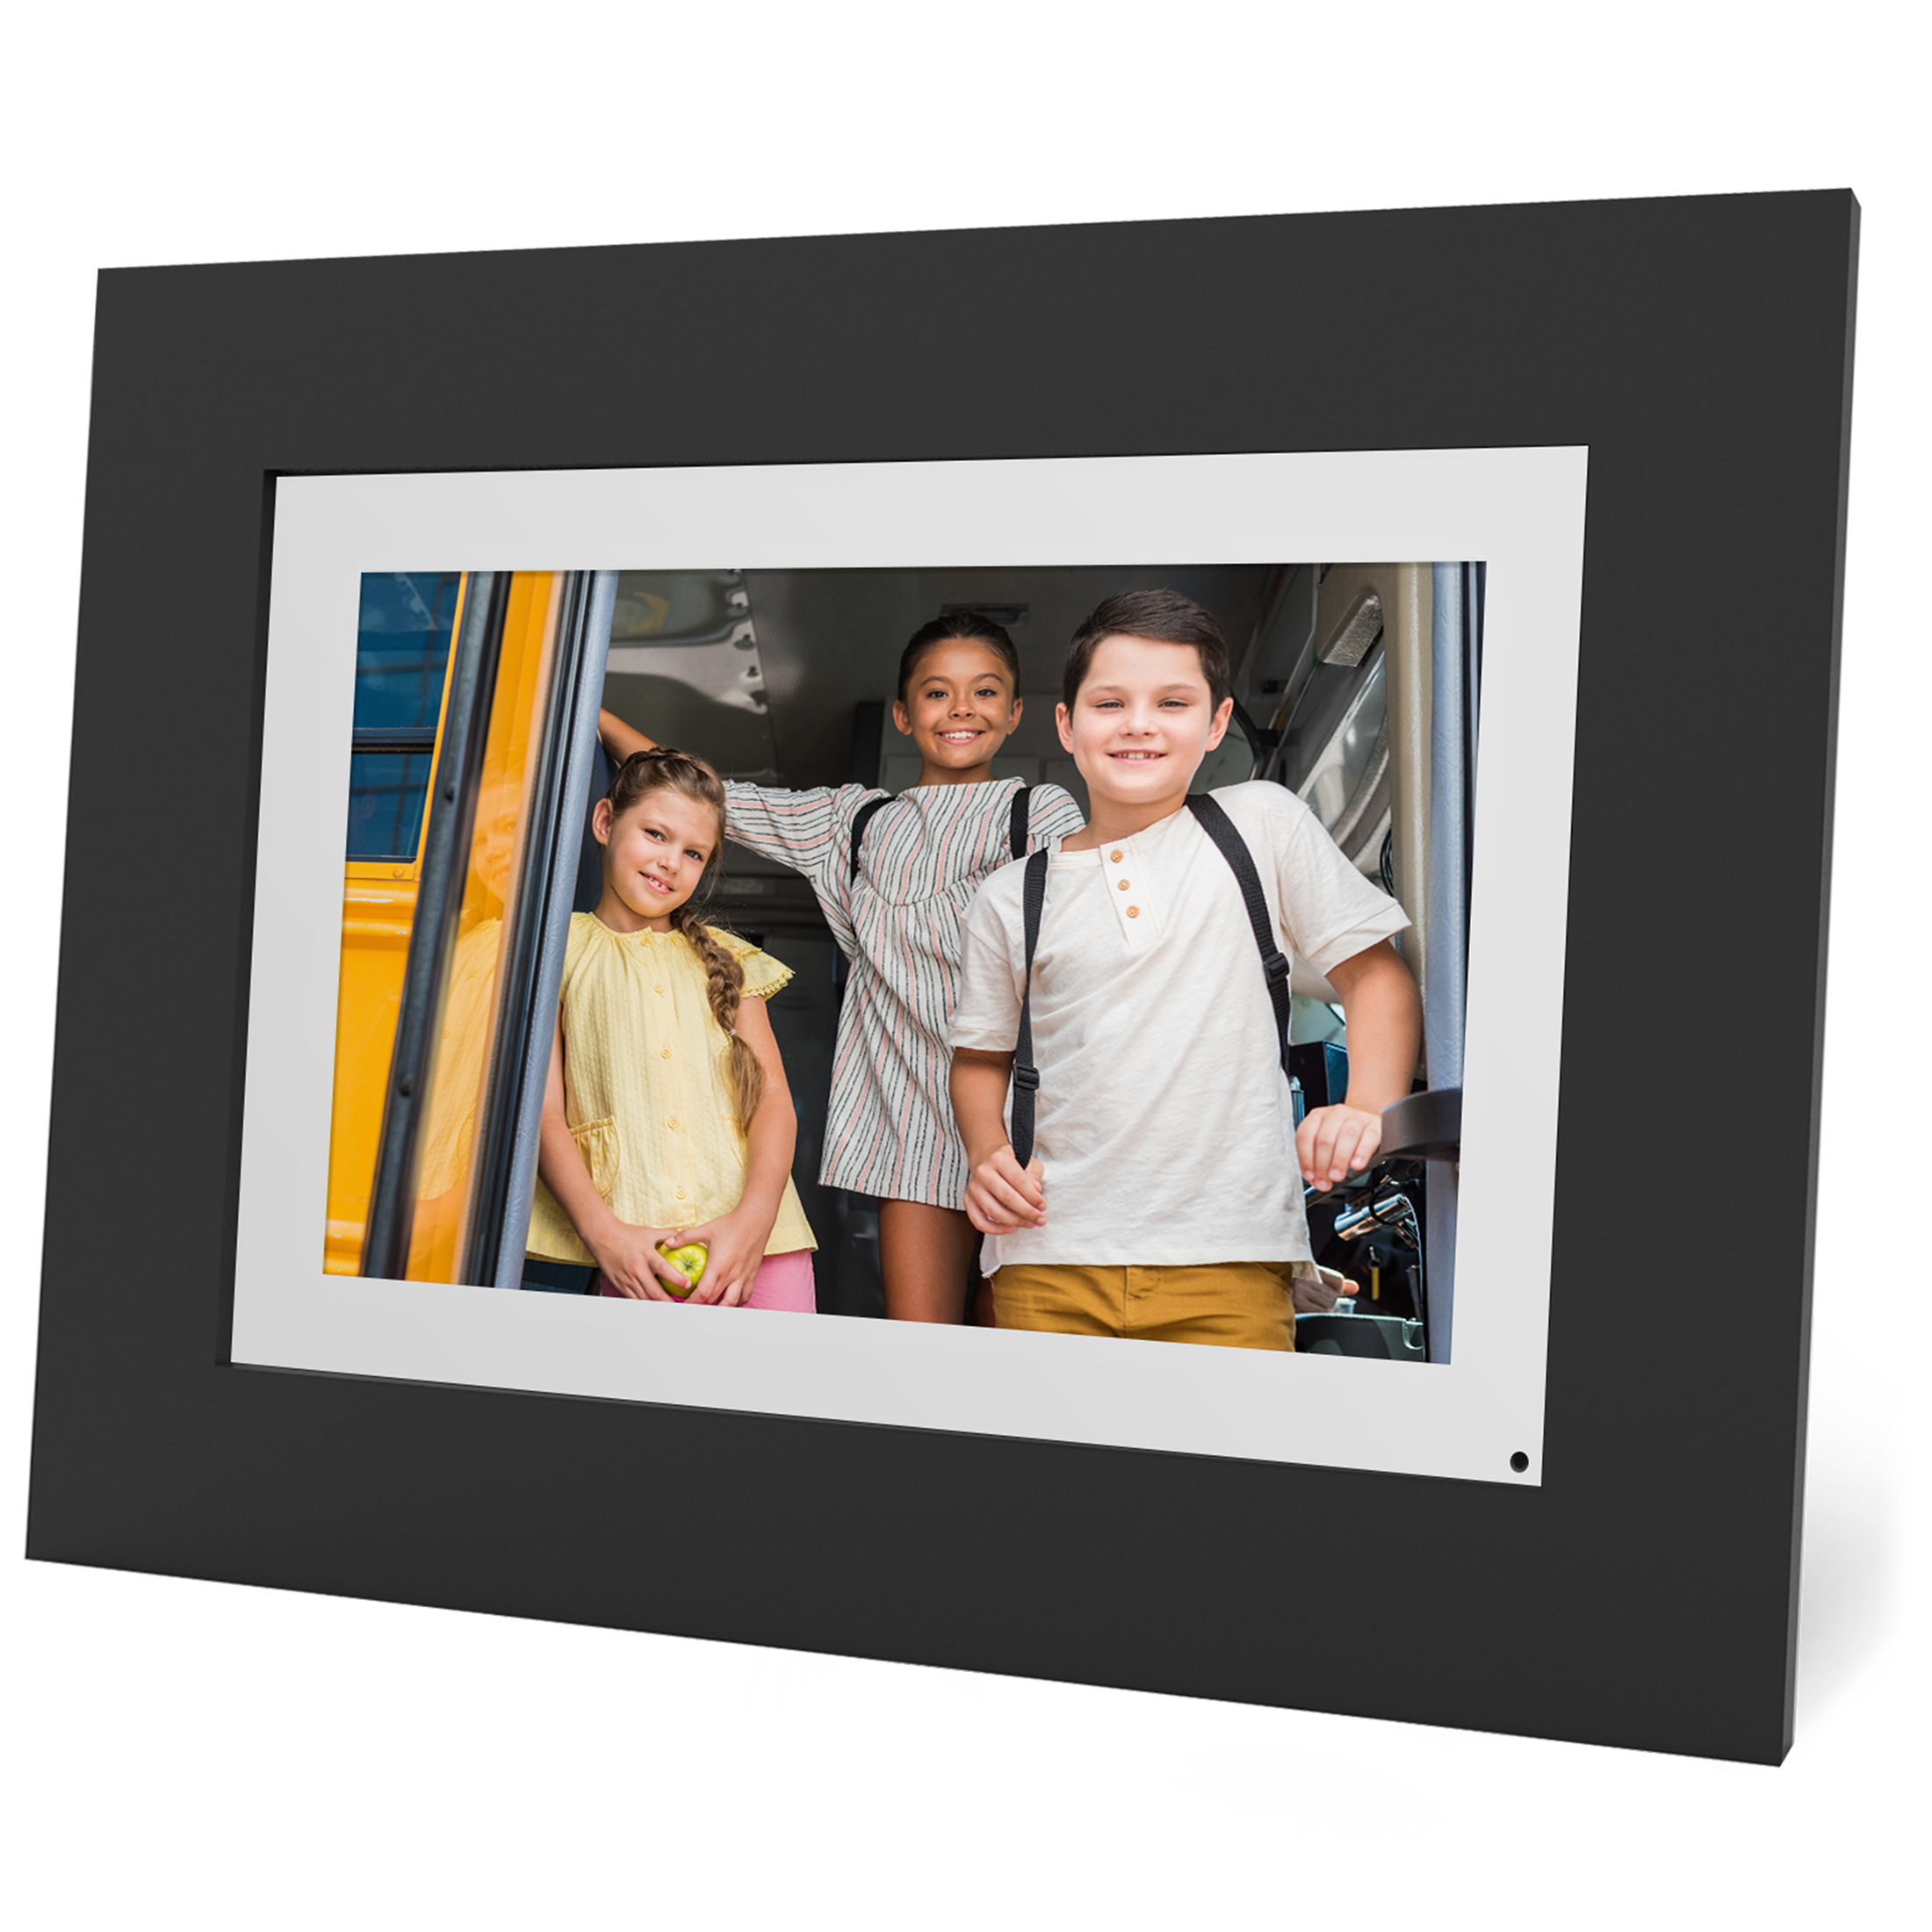 1st Gen. Simplysmart Home Friends And Family 10.1” Wi-Fi Smart Digital Picture Frame, Send Pictures From Phone To Frame, Hd 1080P Touchscreen, 8Gb Internal Memory - image 3 of 5